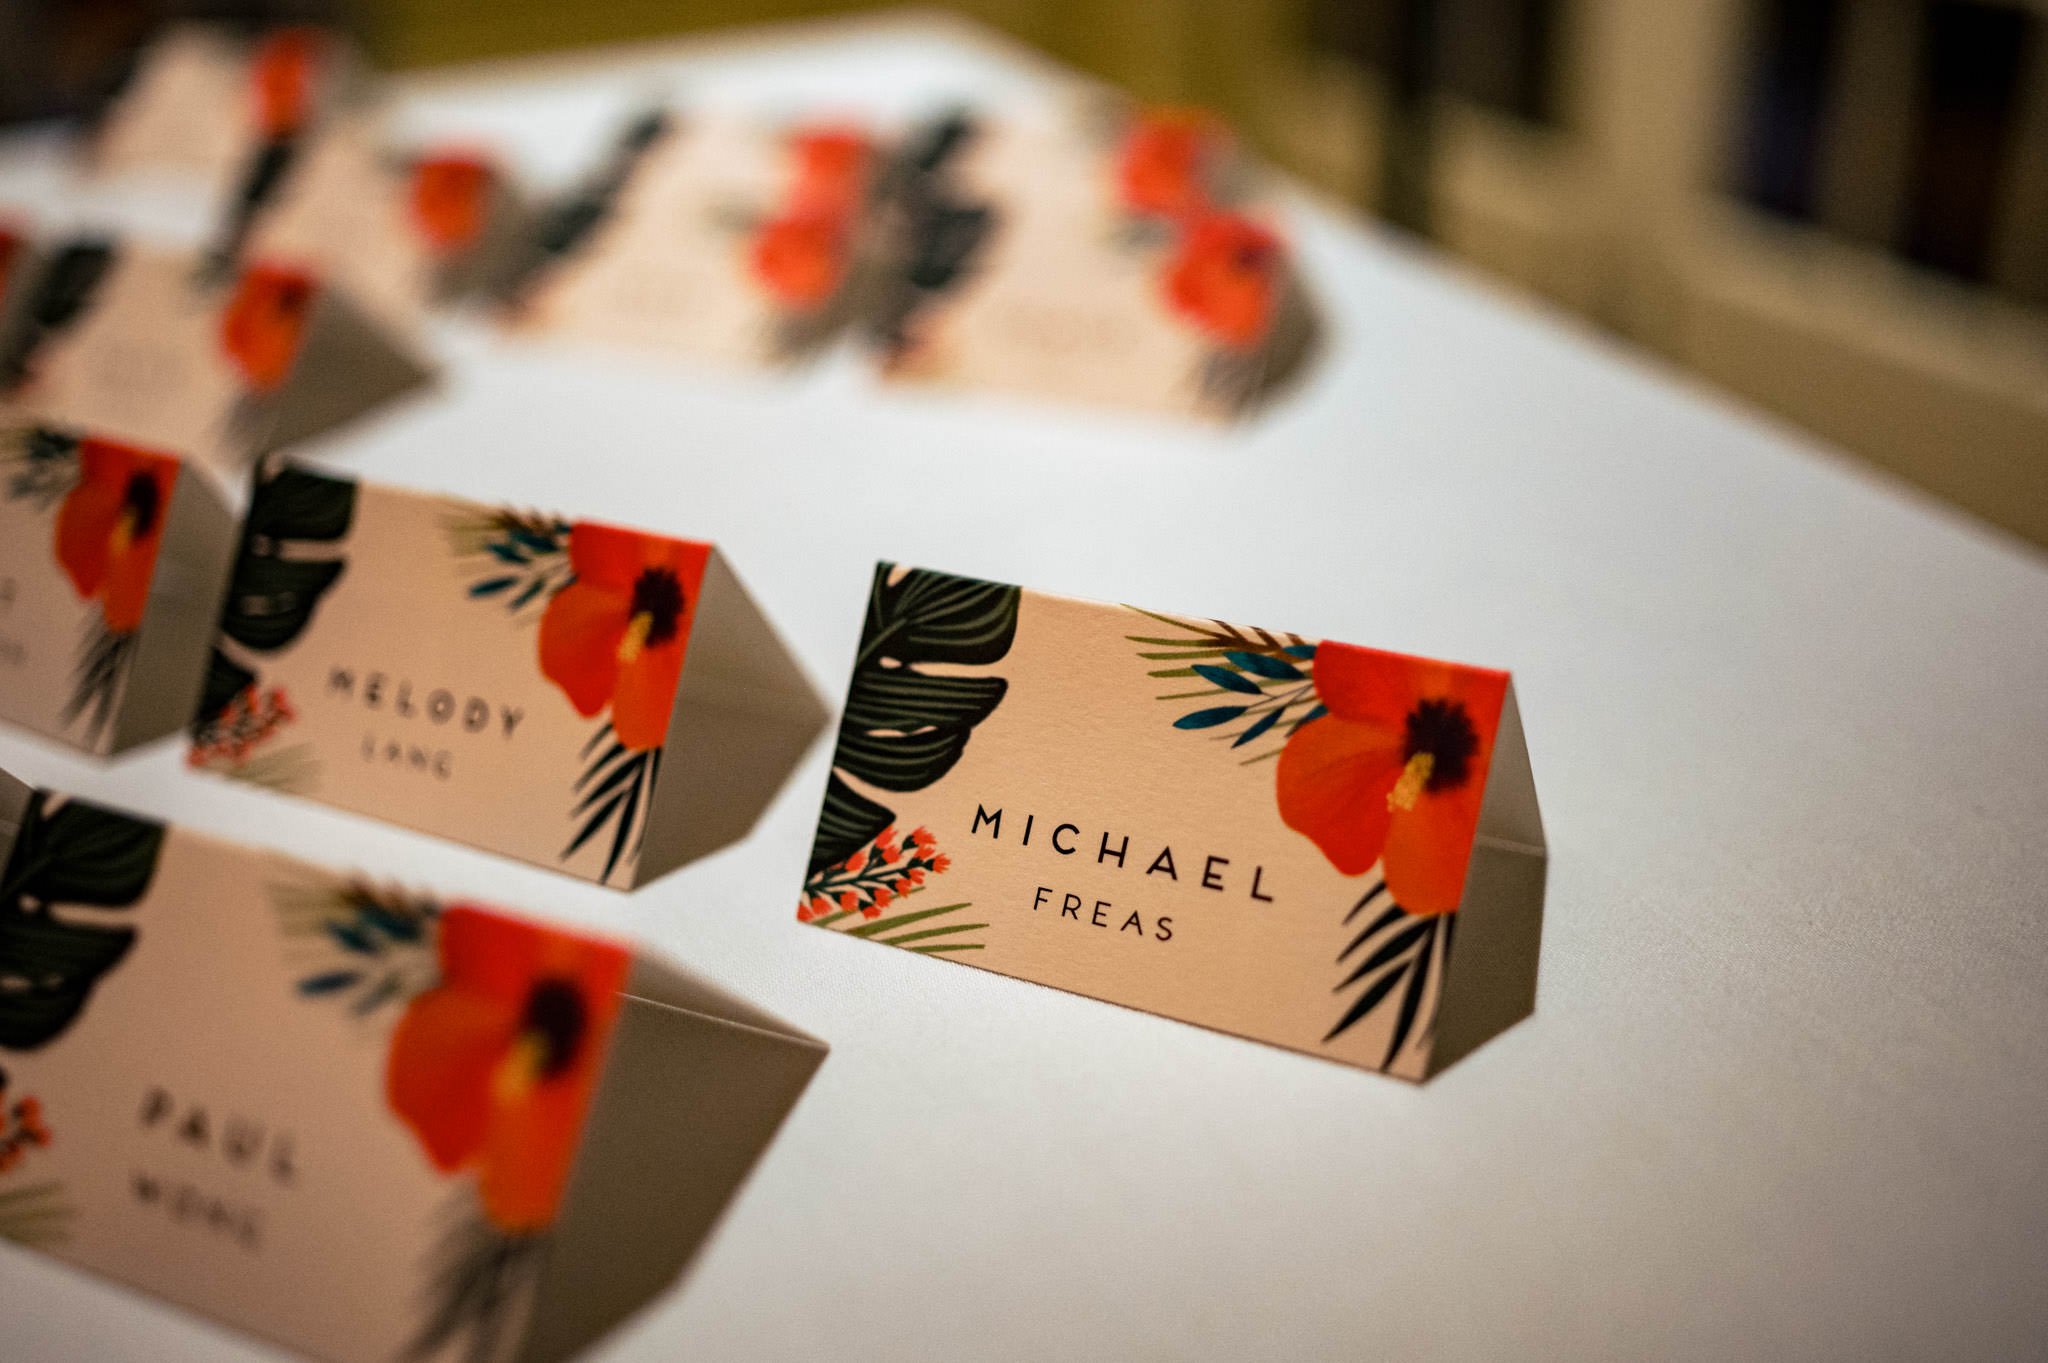 Row of folded place cards with floral design and names; forefront card reads "michael freas" in a destination wedding setting in Honolulu, Hawaii.